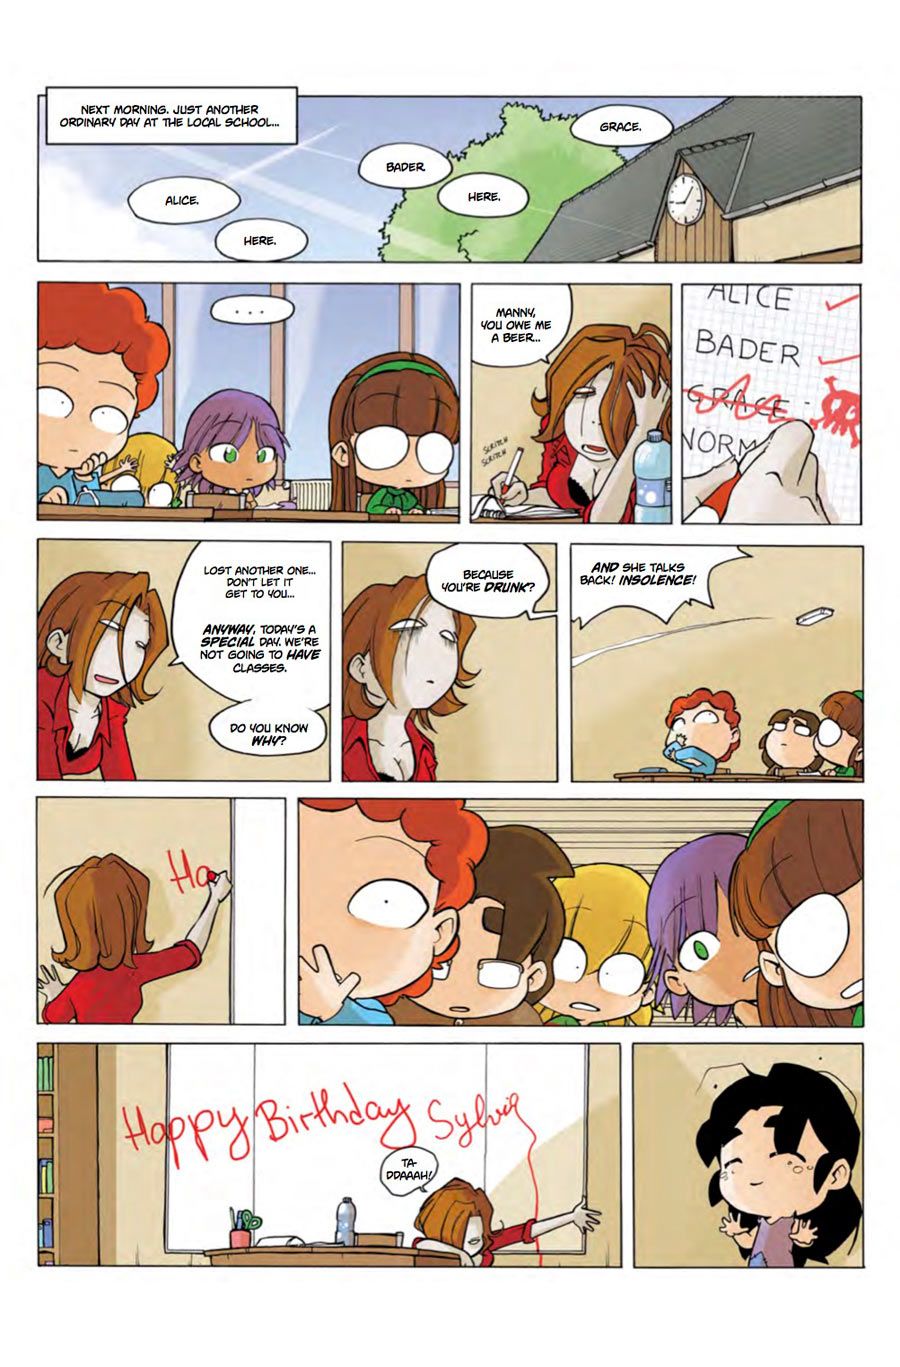 norman_2_2_page-1